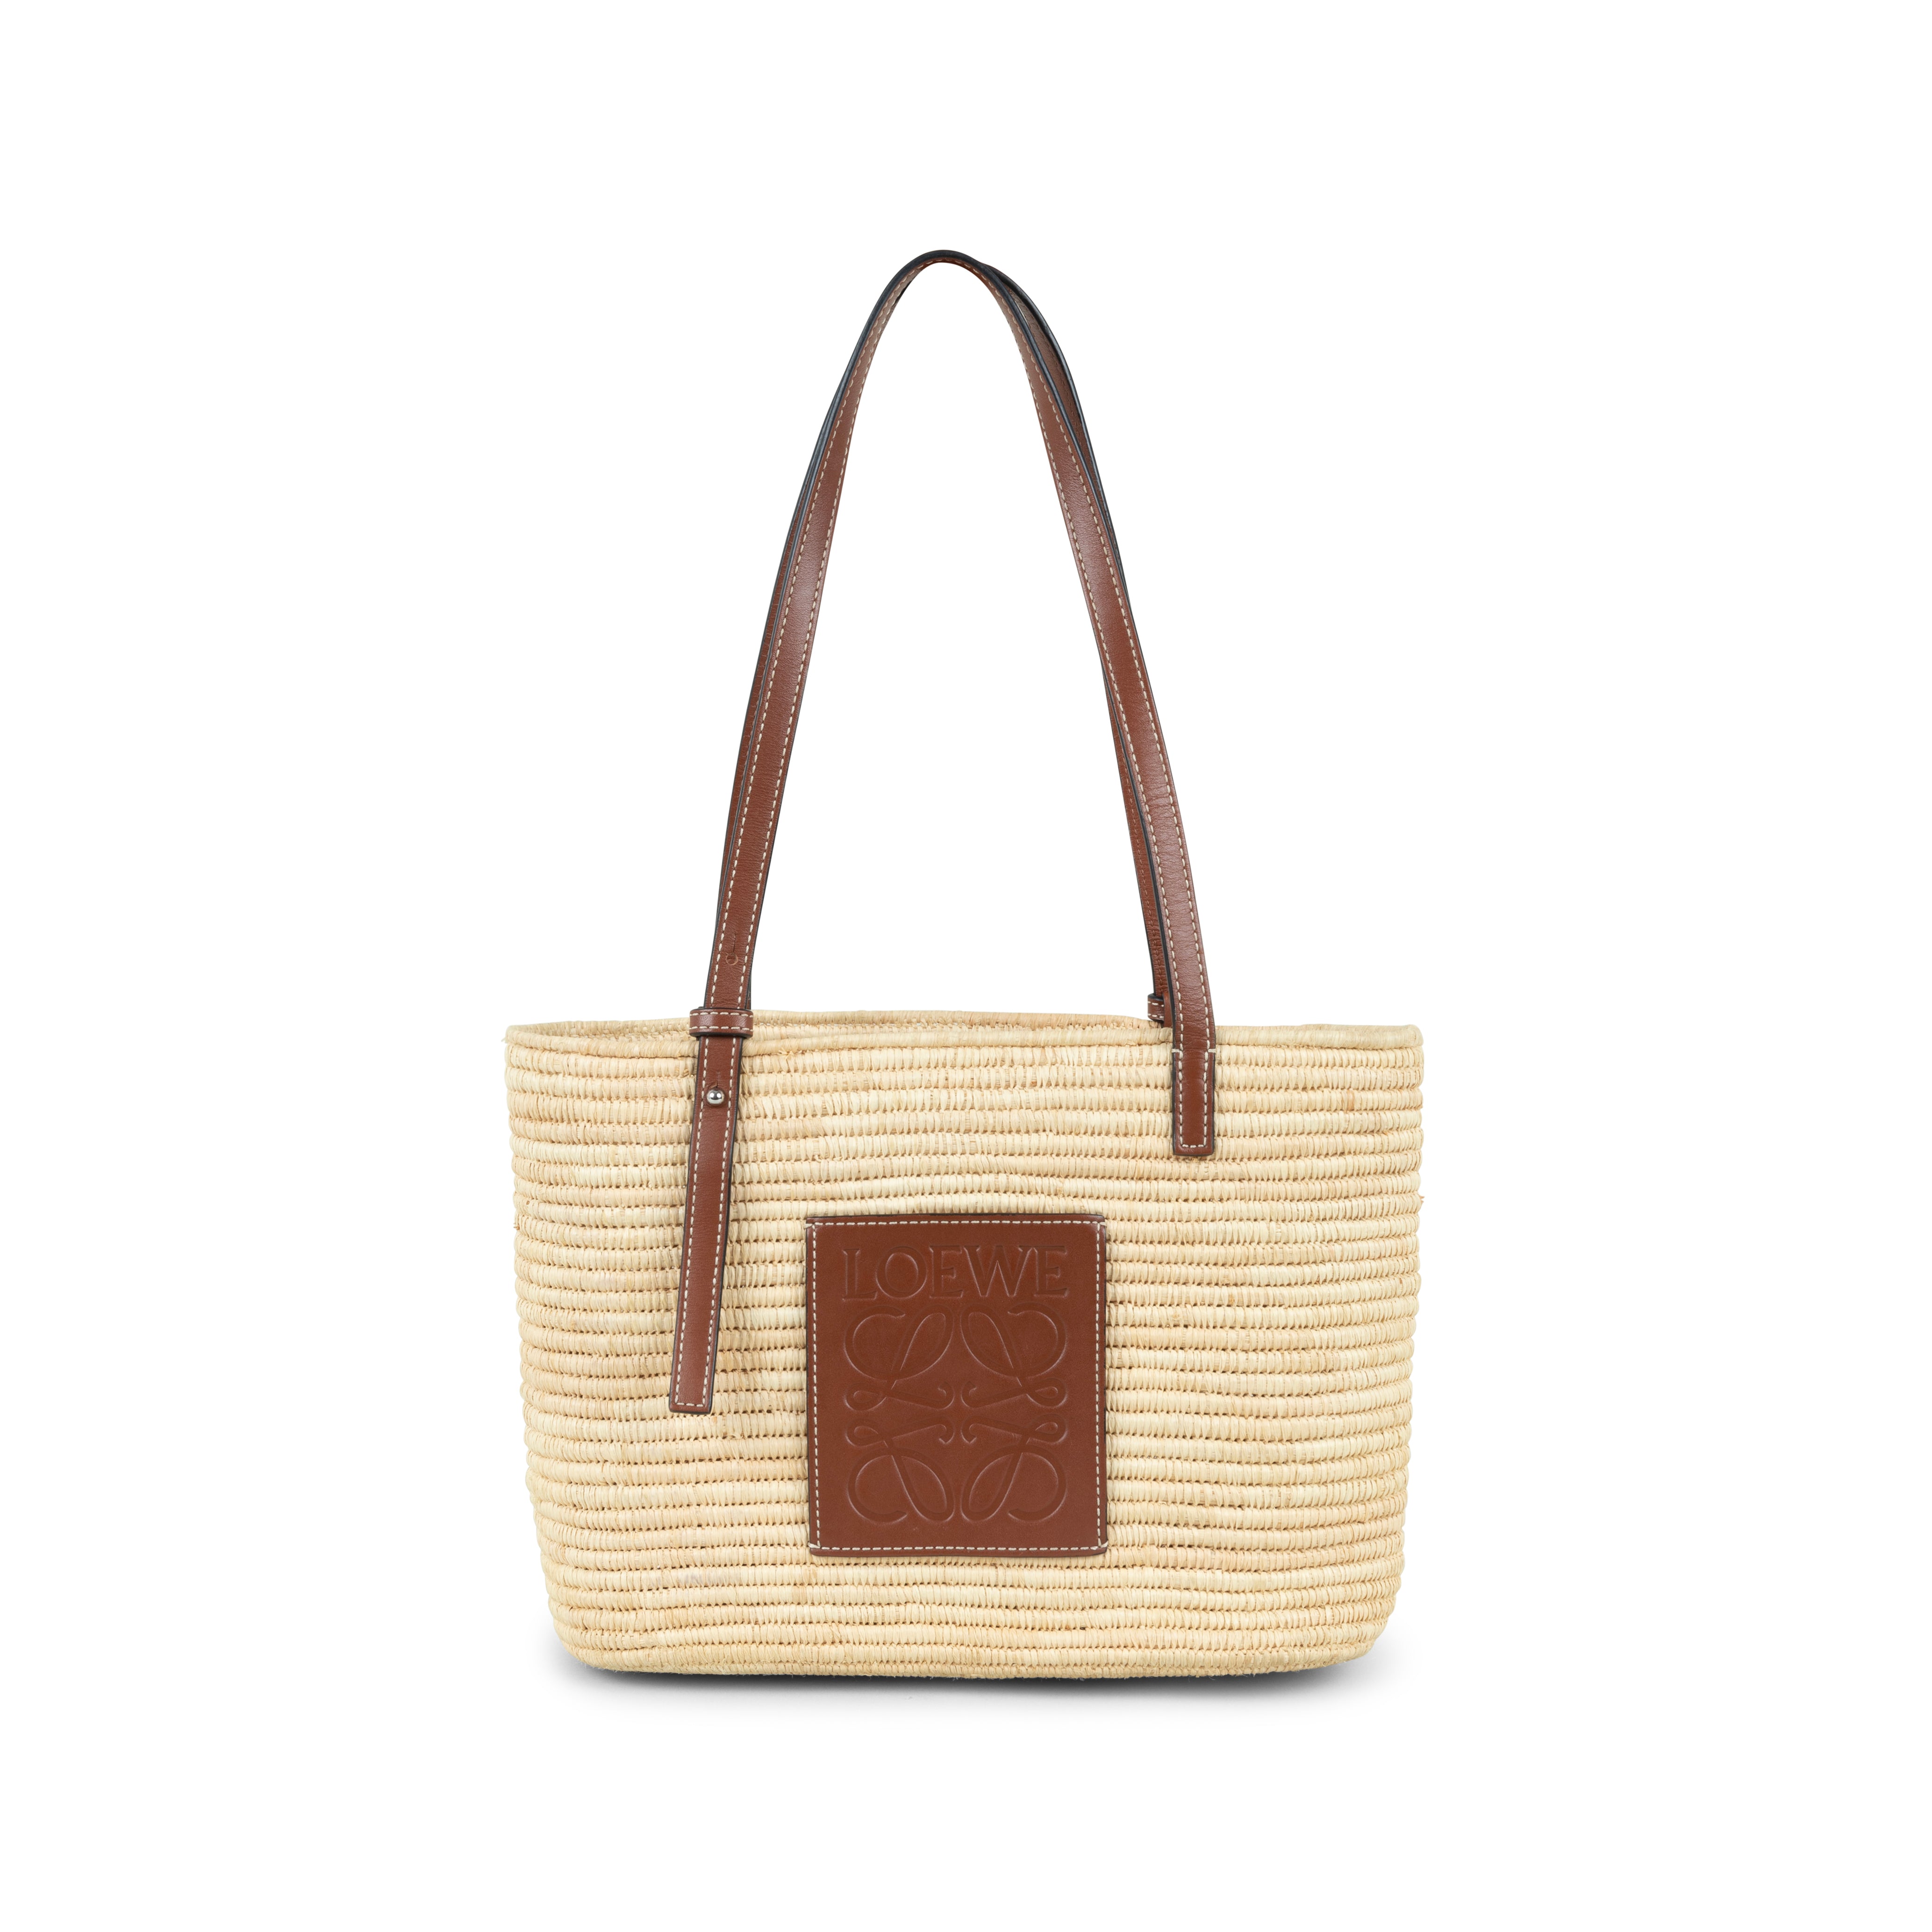 An Affordable Option For The Loewe Basket Bag - The Fashion Request